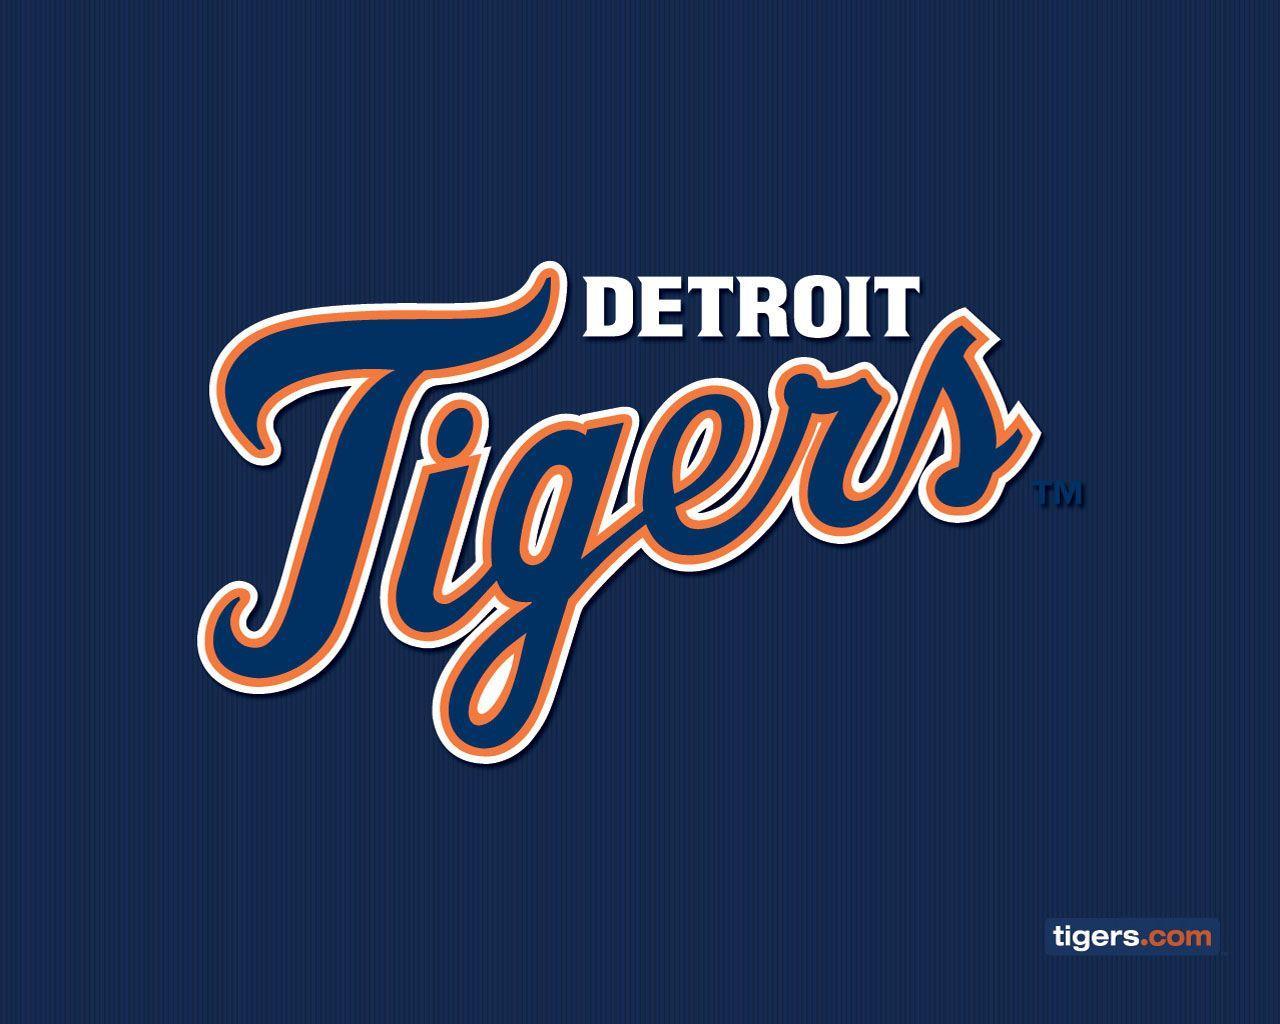 Detroit Tigers Wallpaper and Background Imagex1024